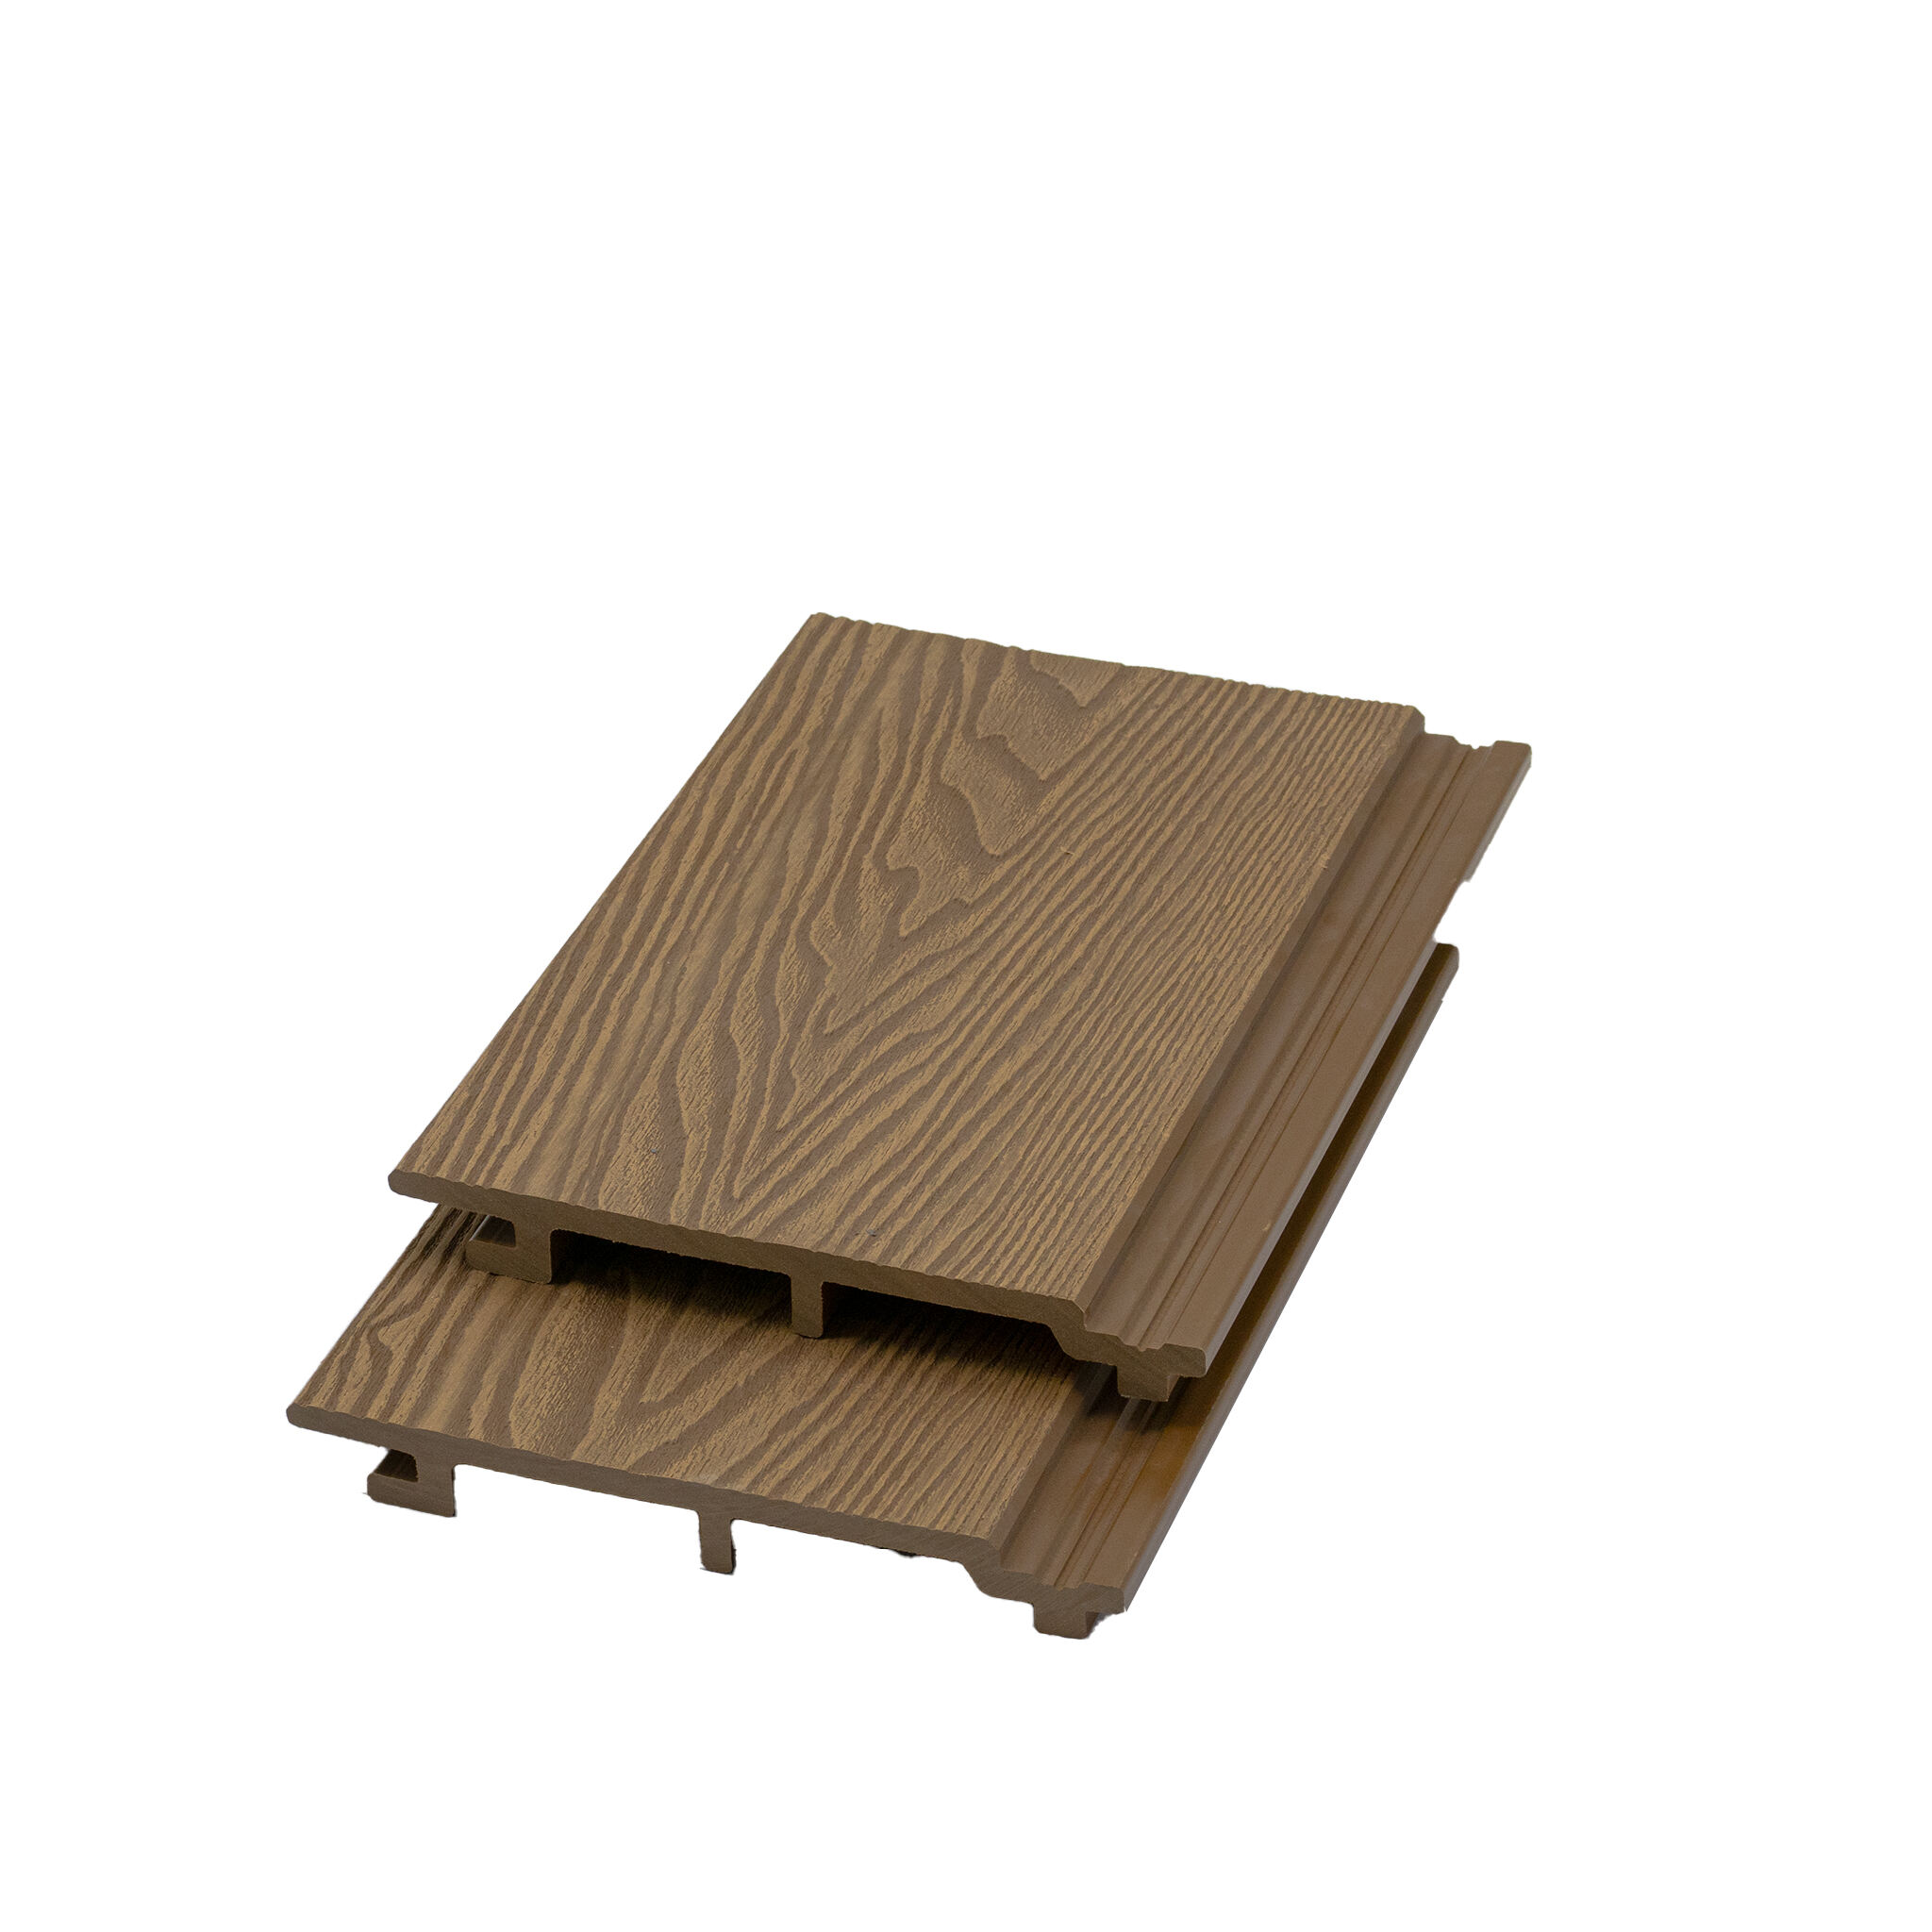 3D Embossed WPC Wall Cladding Wood Grain 174K21-Outdoor Composite Cladding